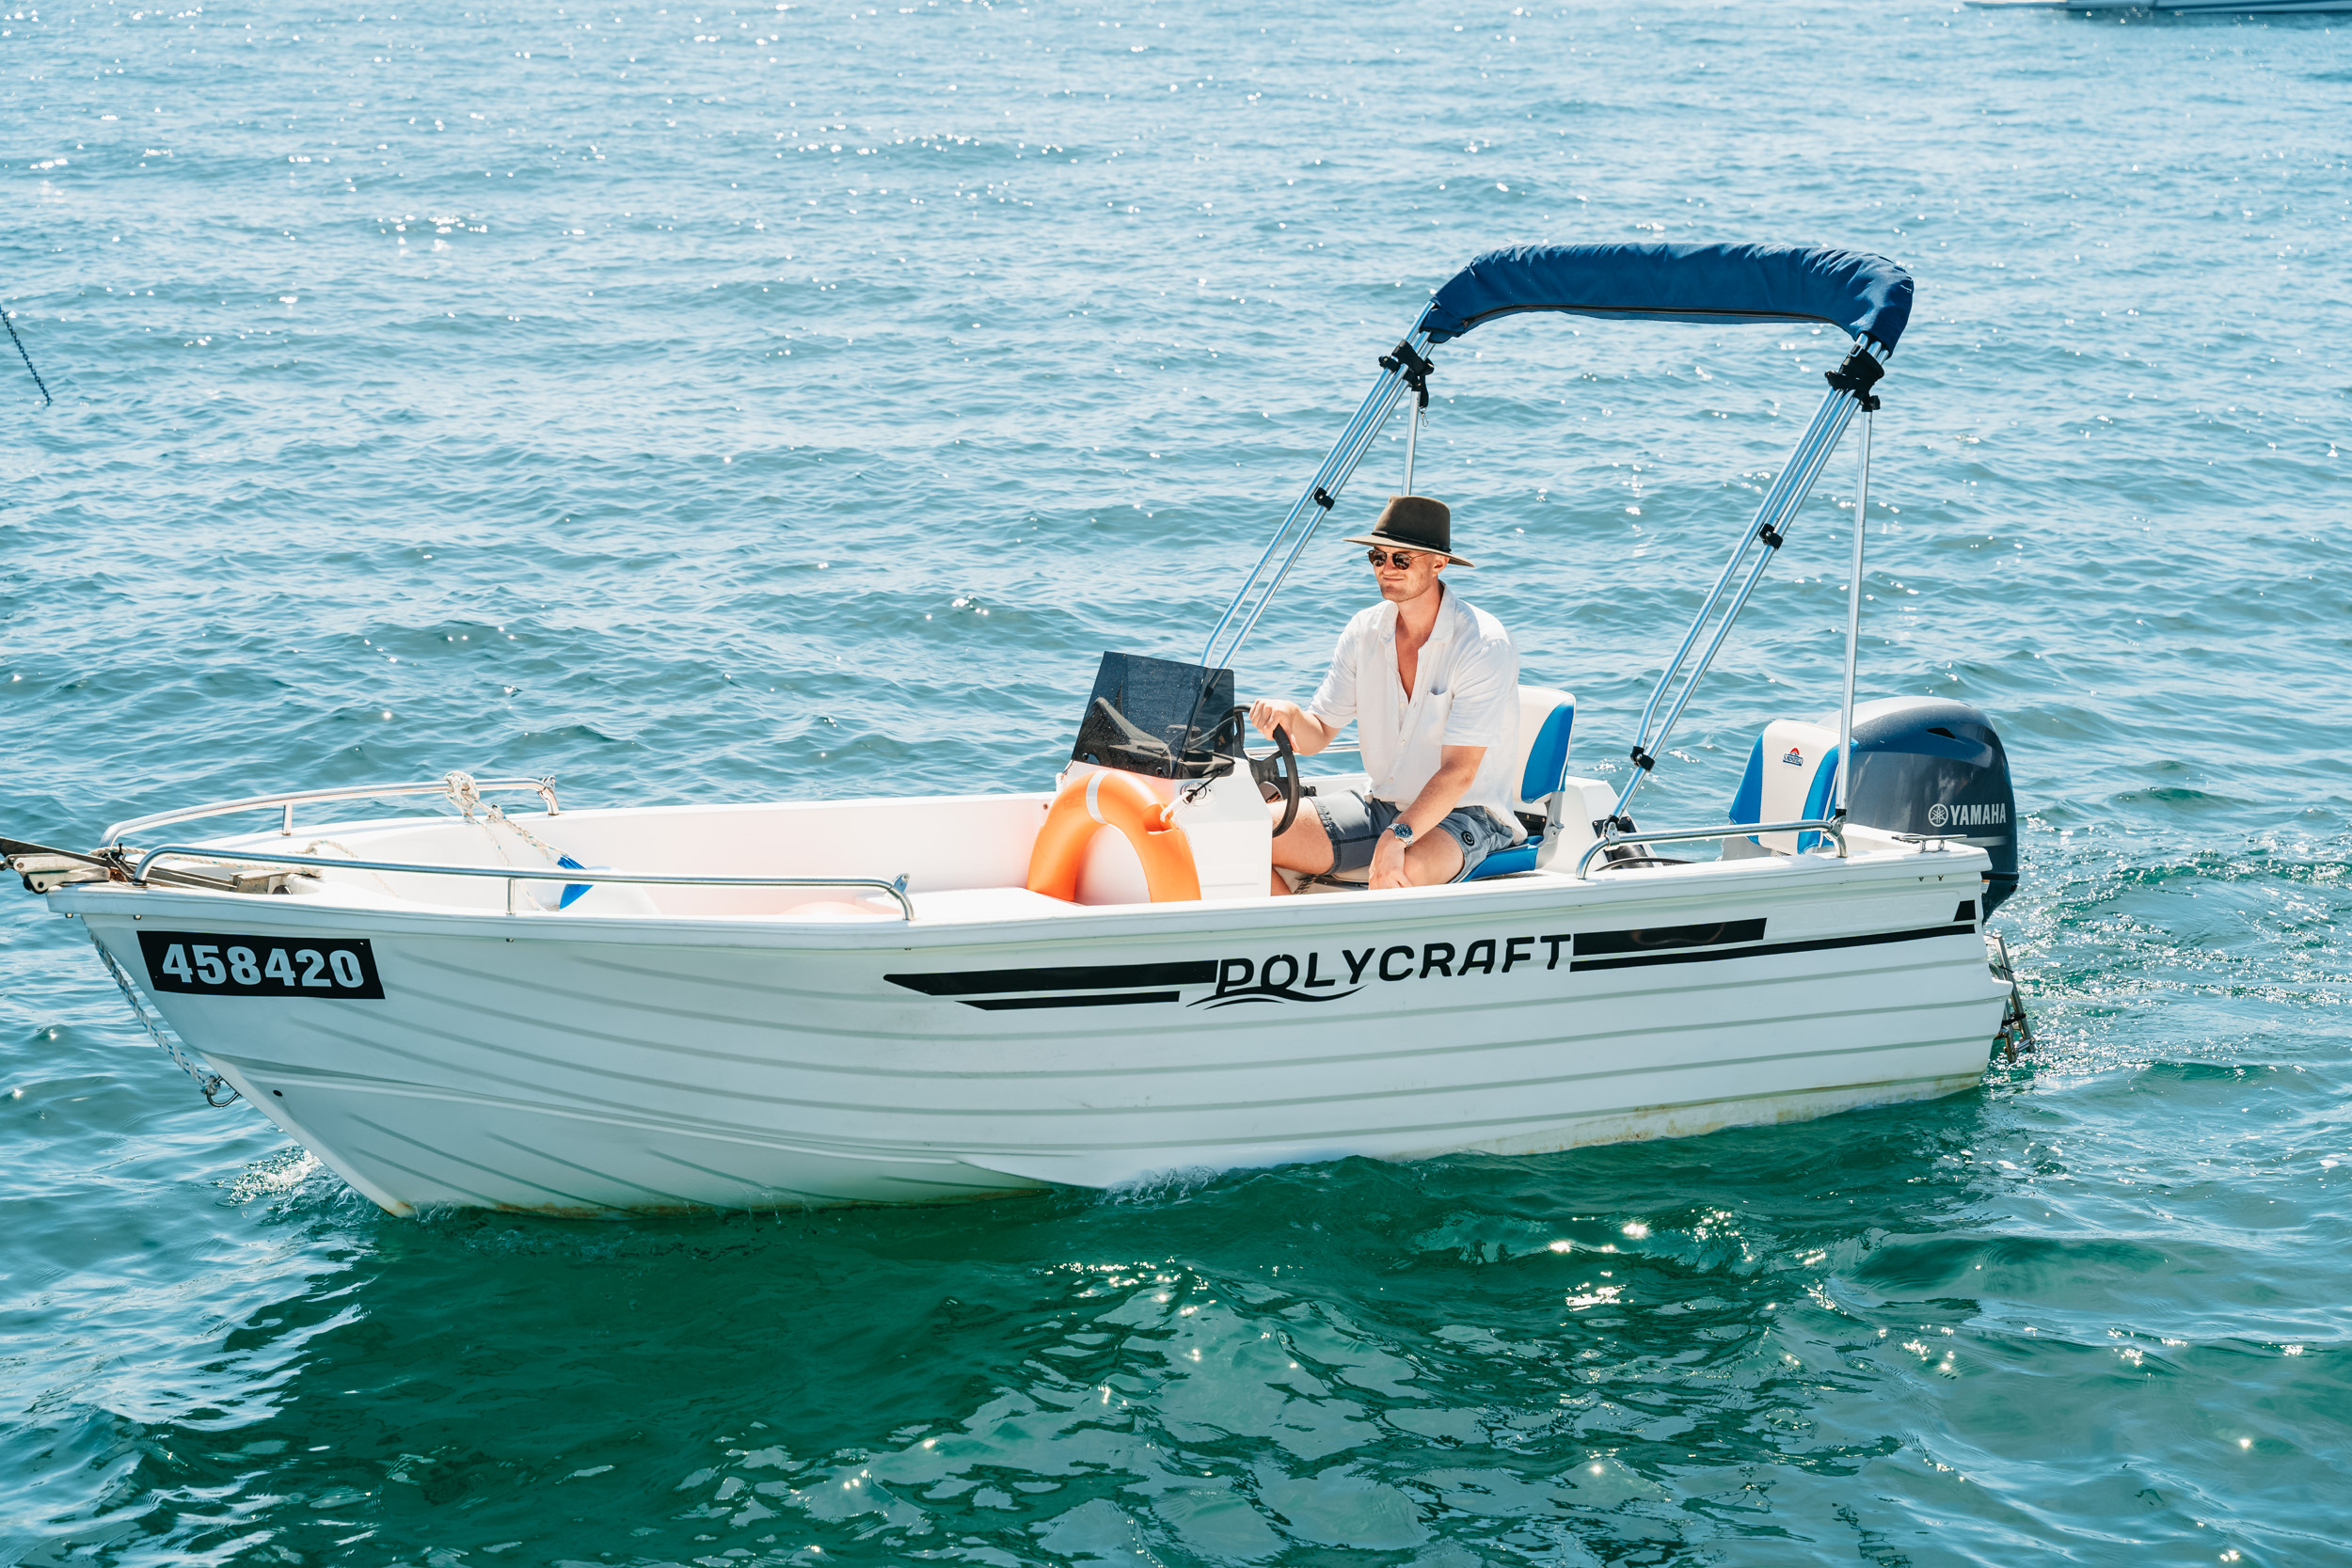 Hire – Polycraft Drifter 4.5m for 5 persons